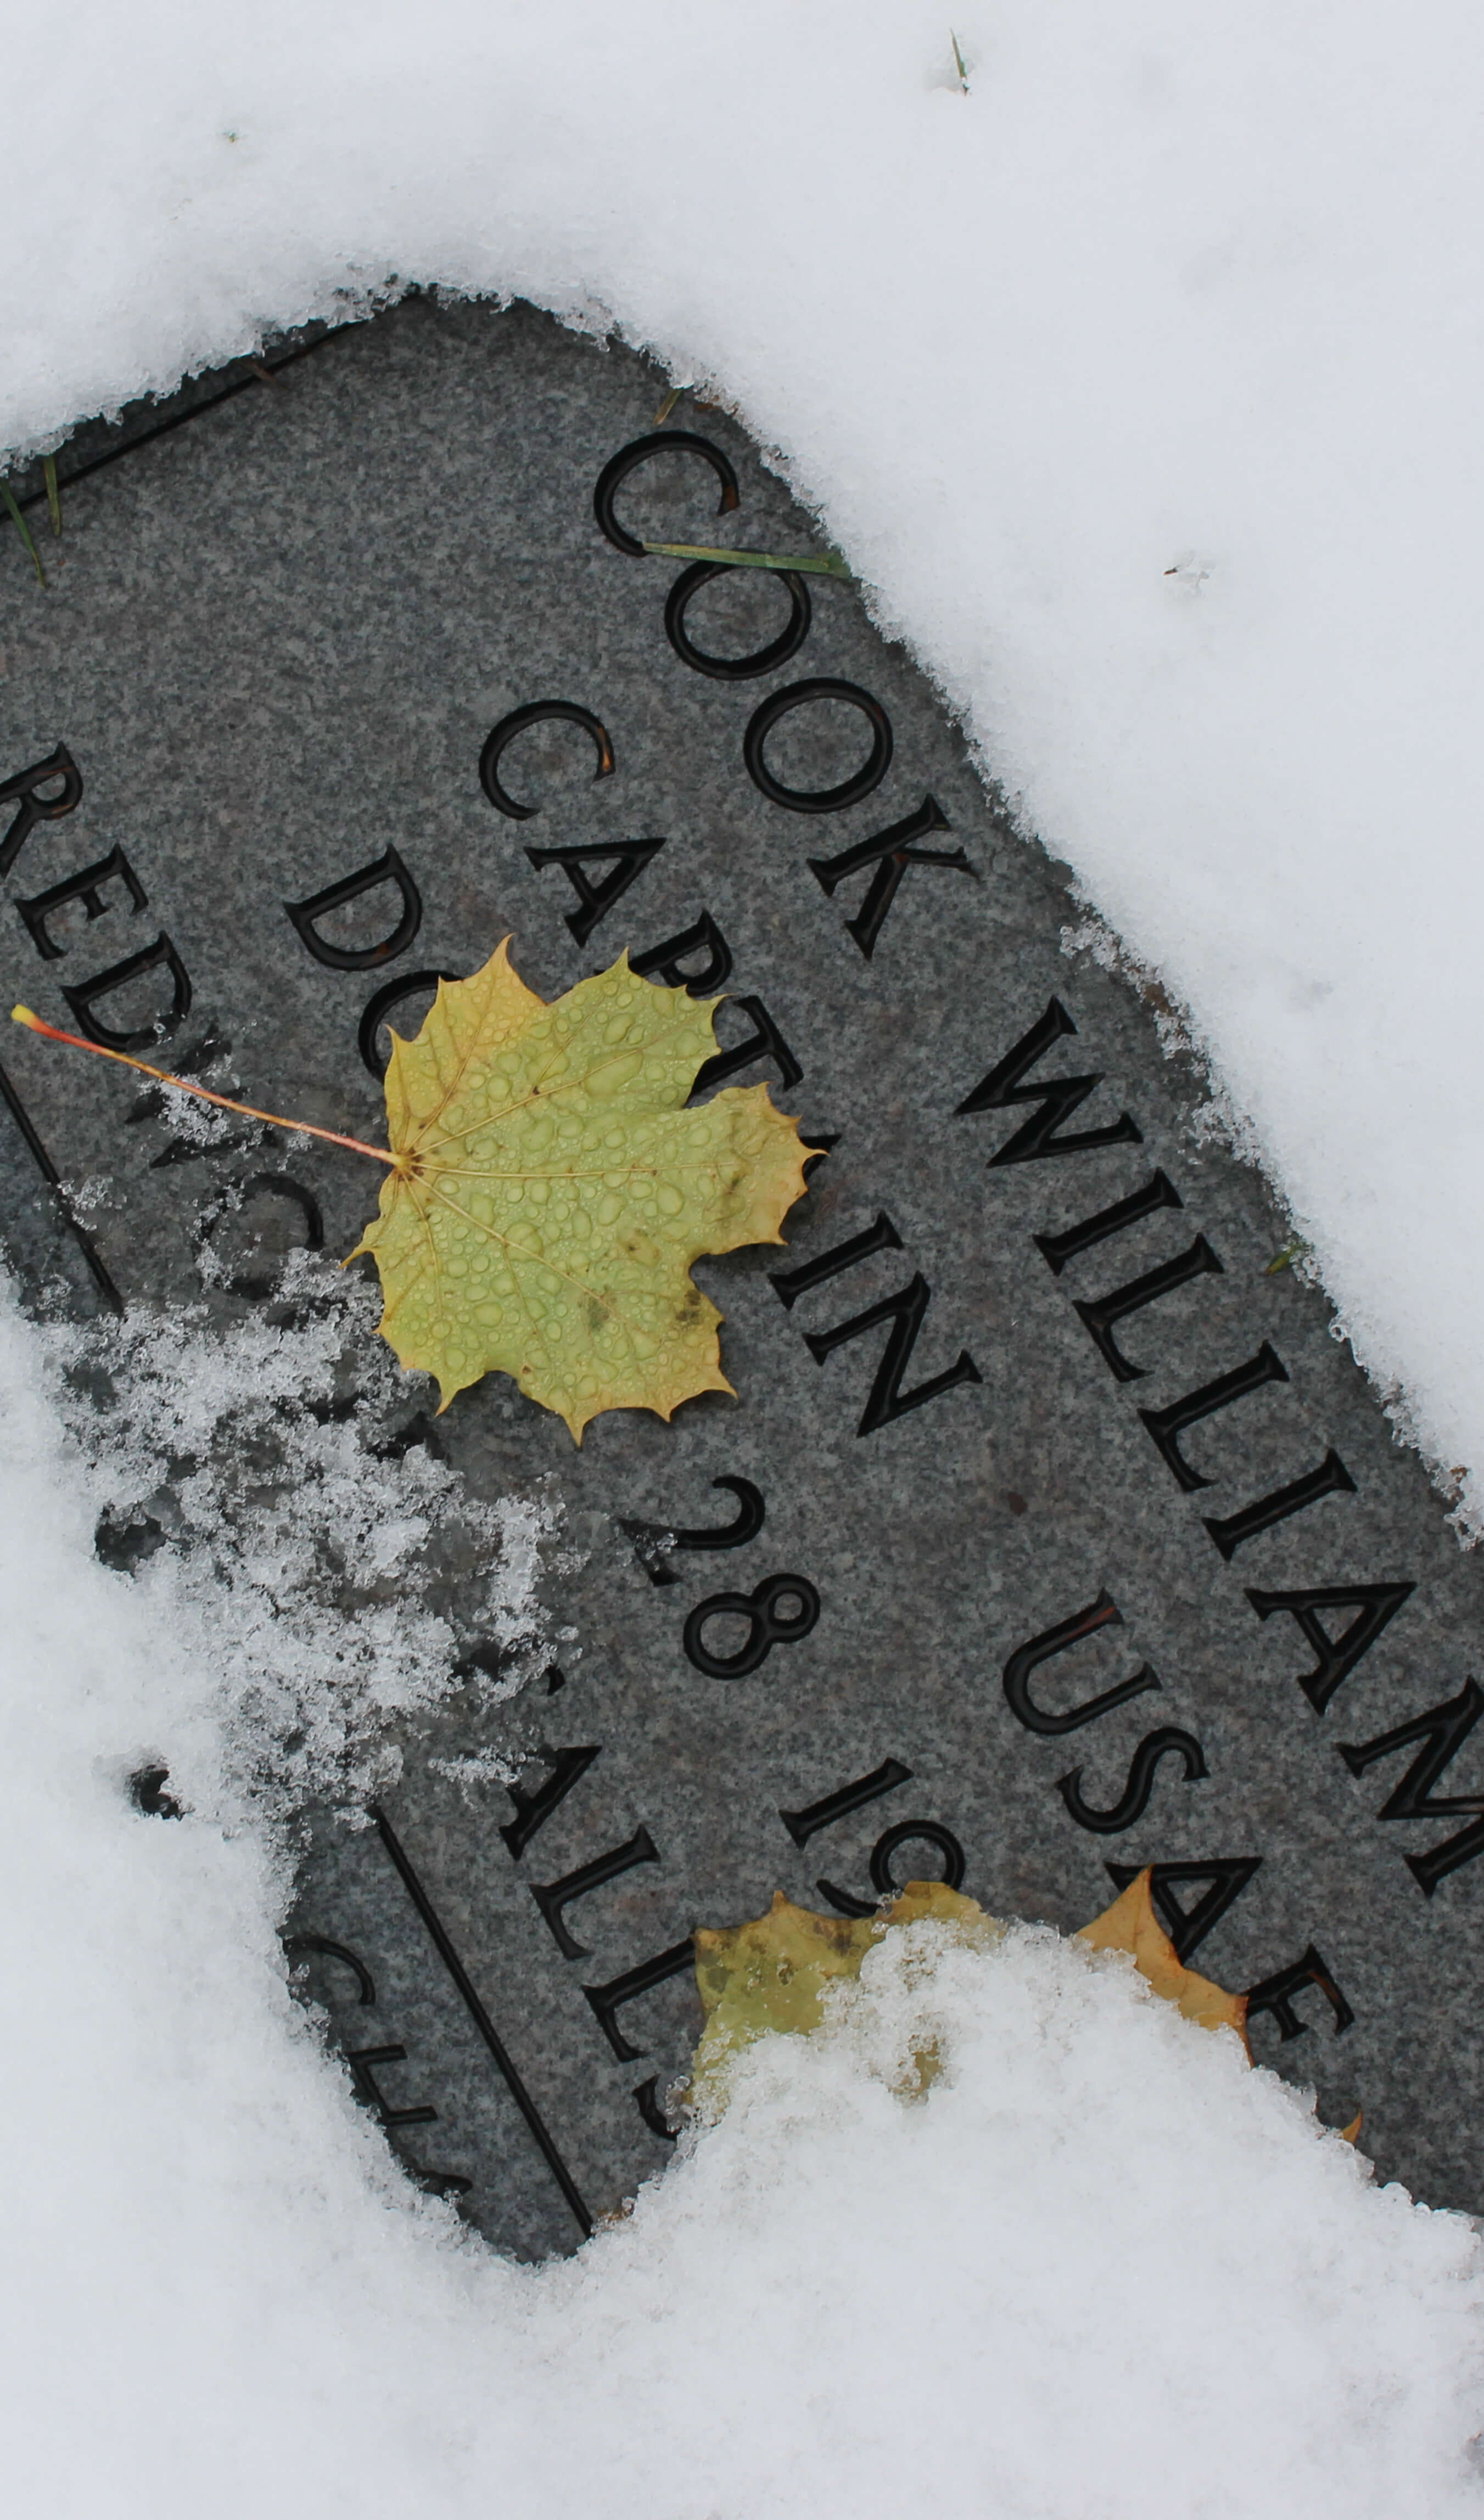 Memorial stone with the name Cook William.